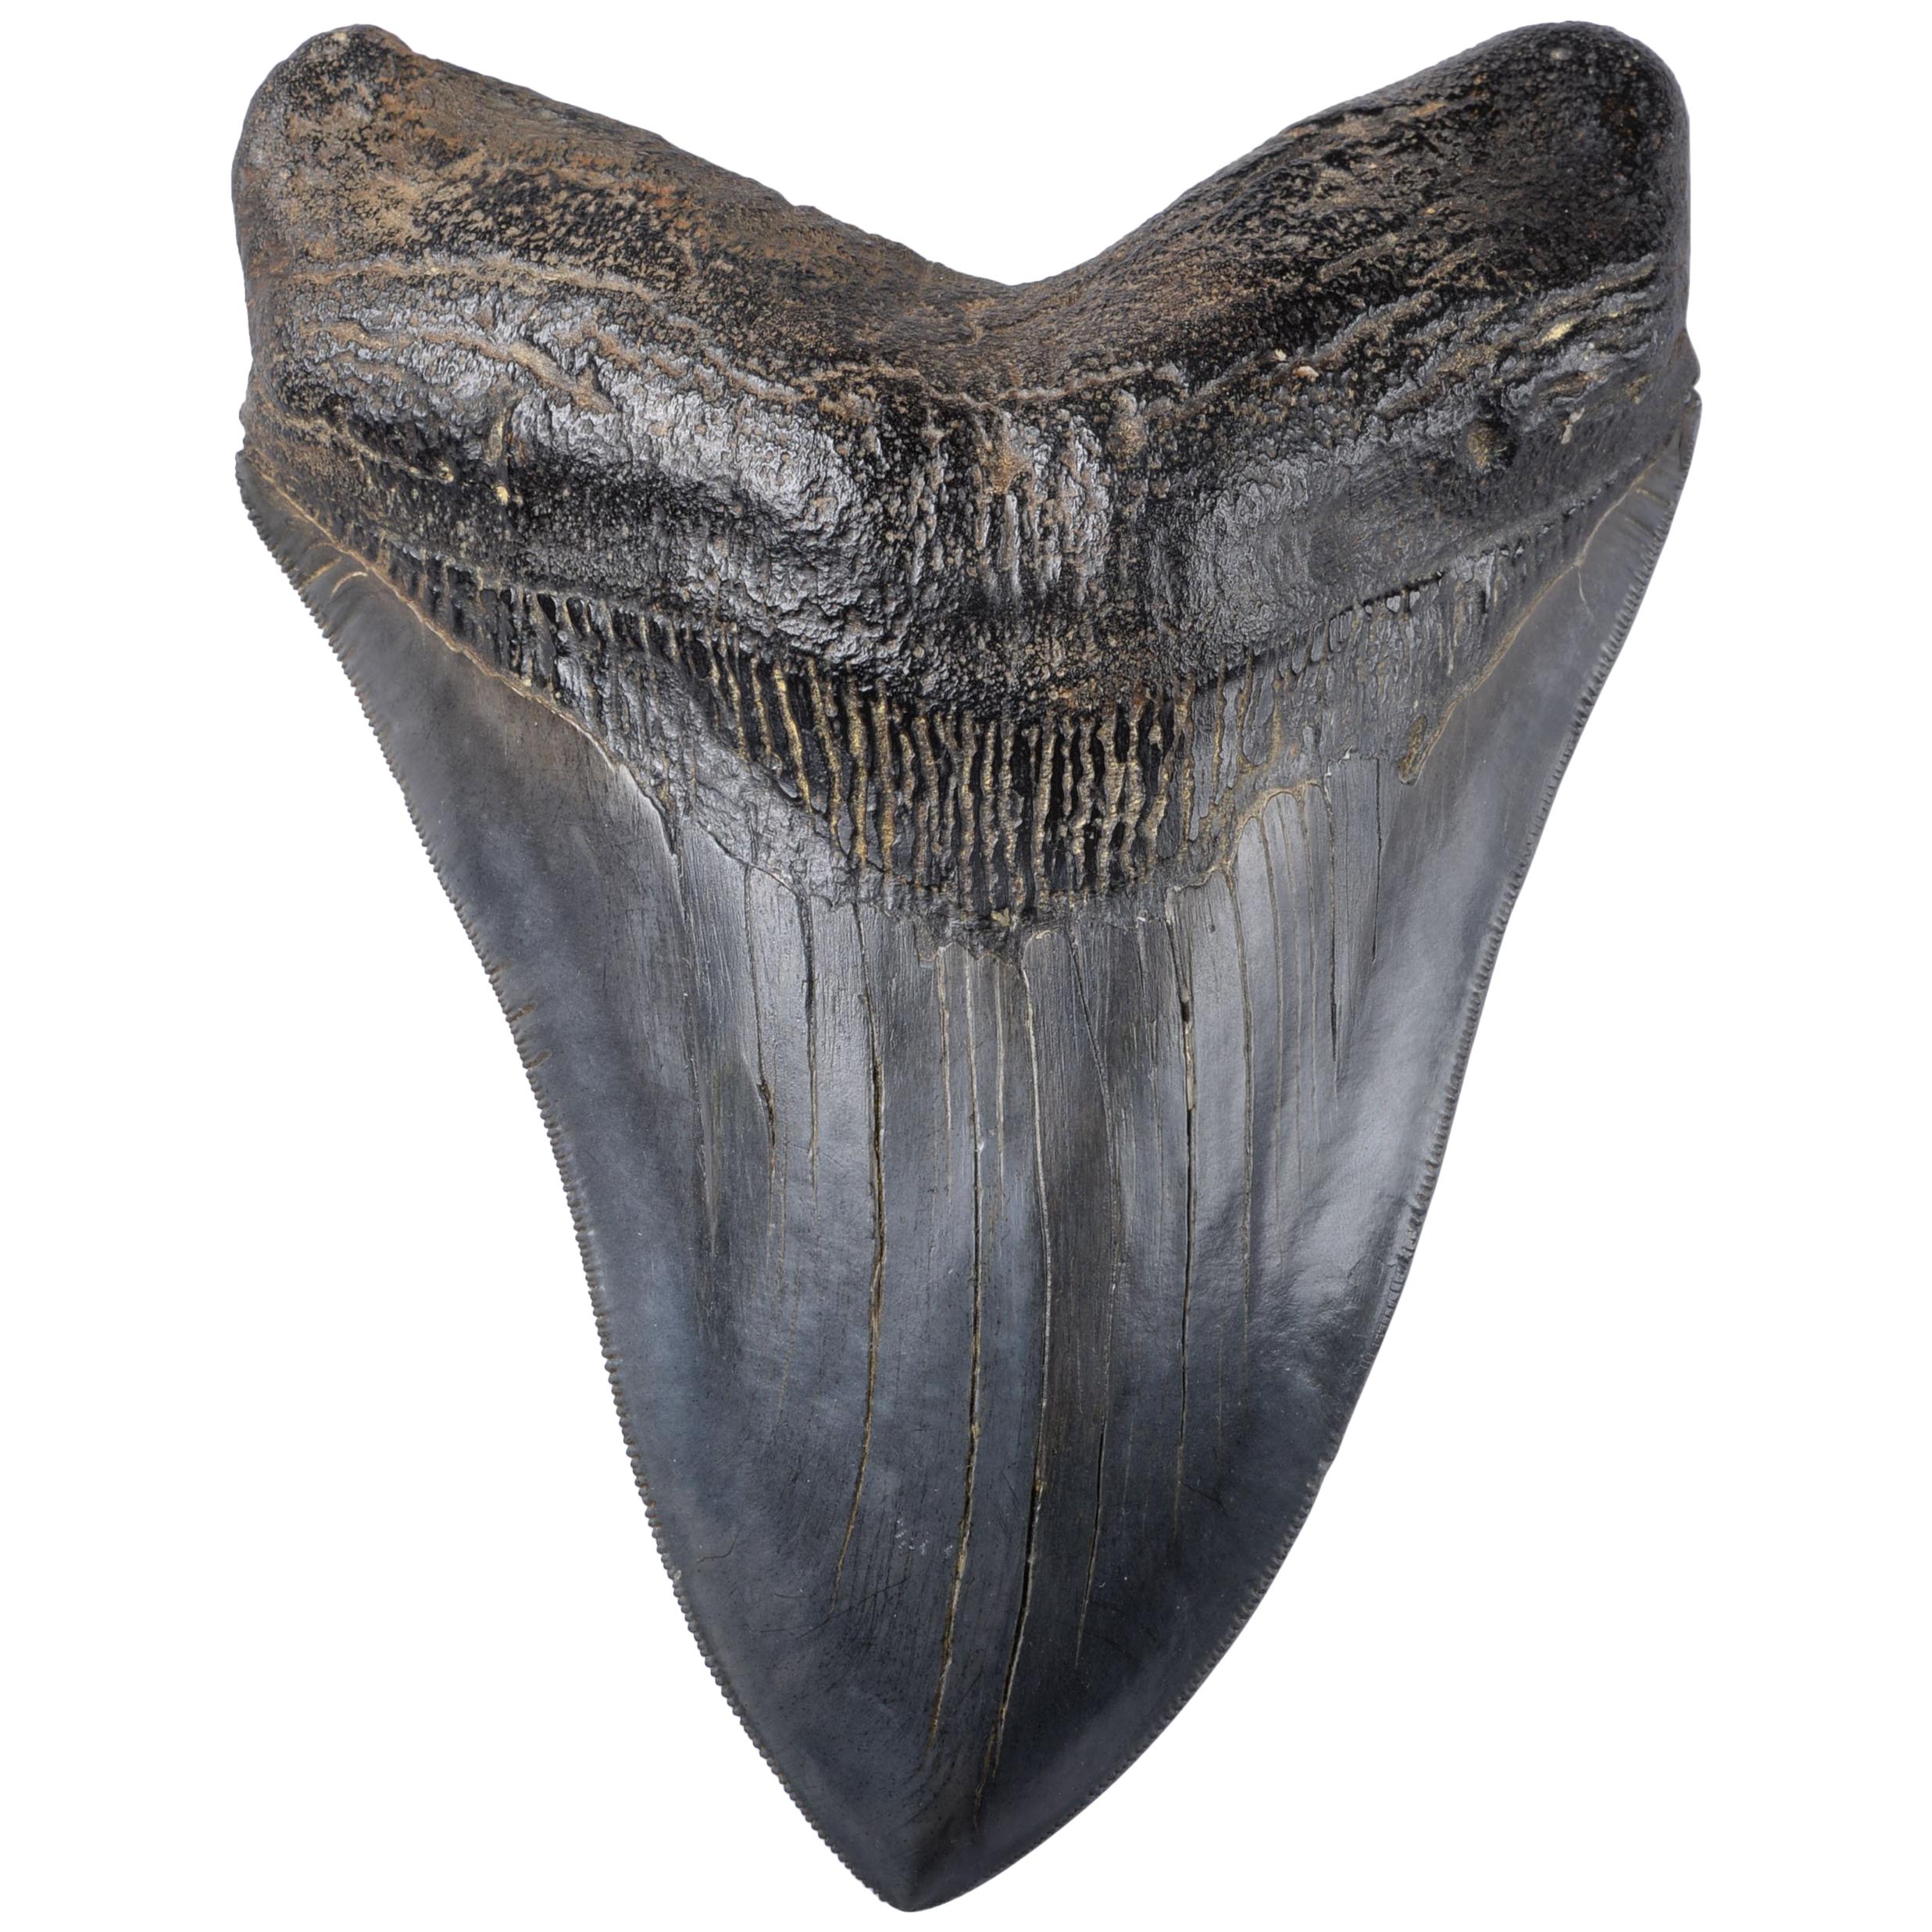 Enormous Megalodon Shark Tooth Fossil